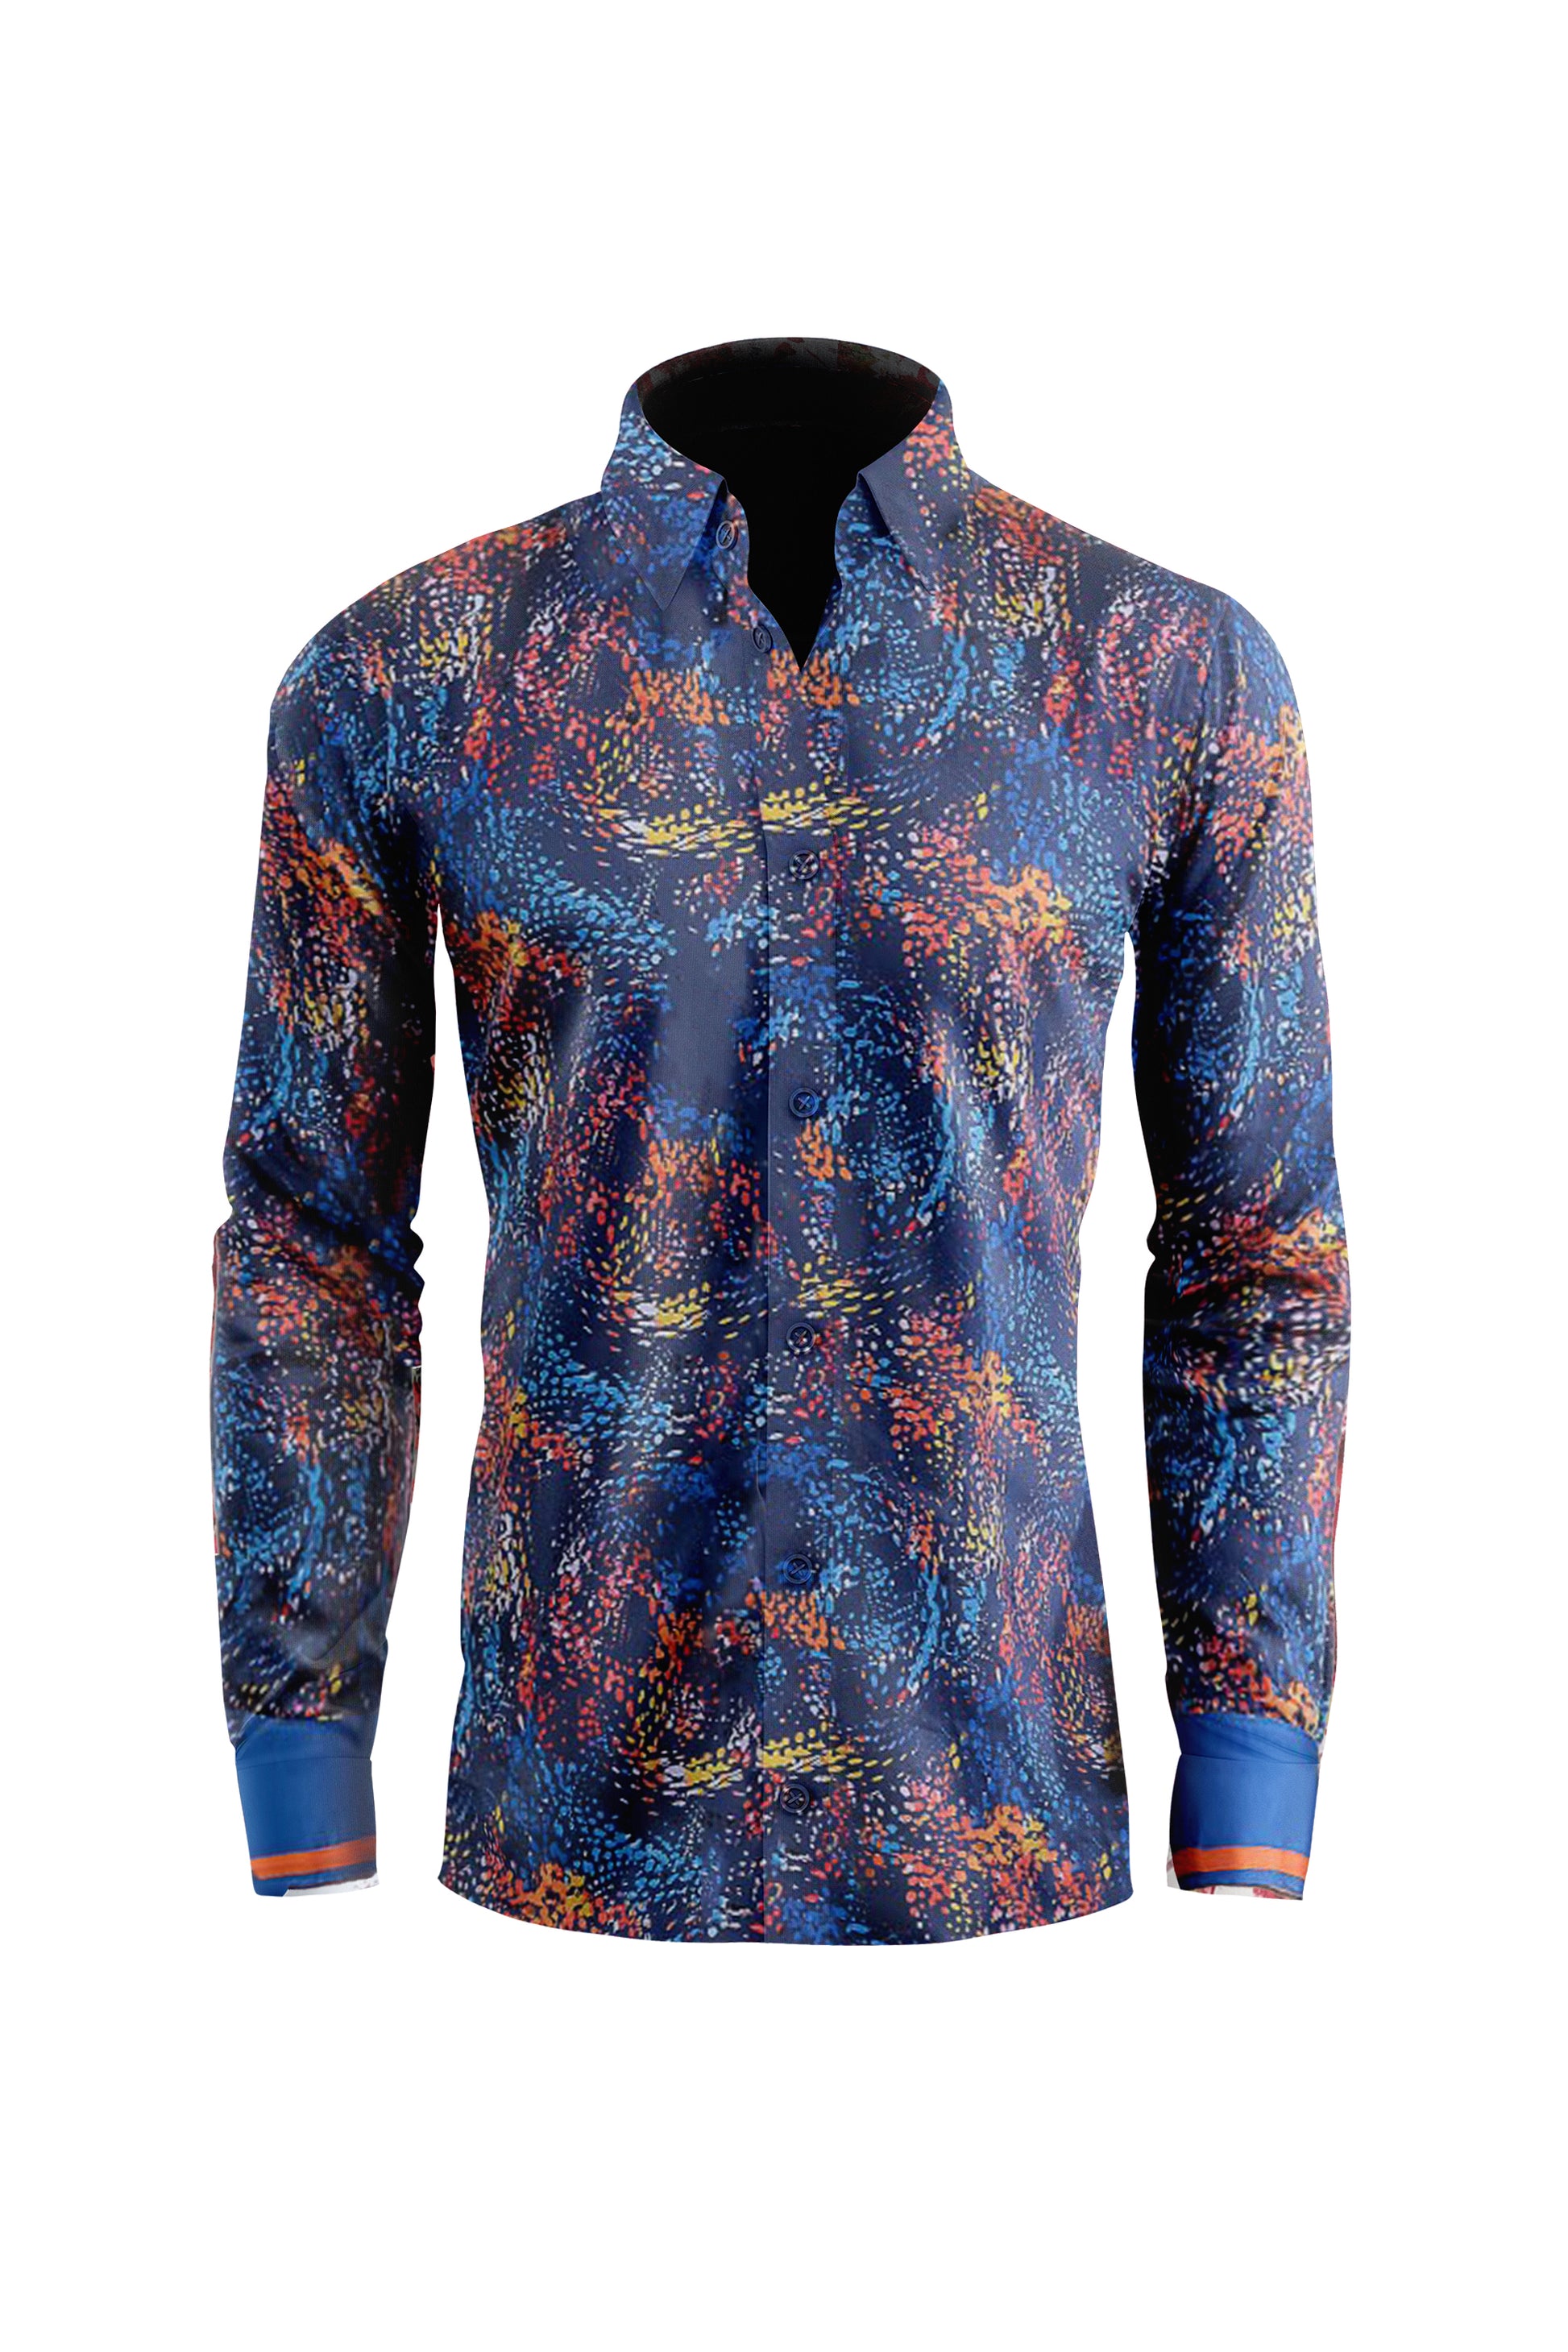 Blue Shirt With Wave Orange Yellow Design CASUAL SHIRT On Sale 30% Off Vercini